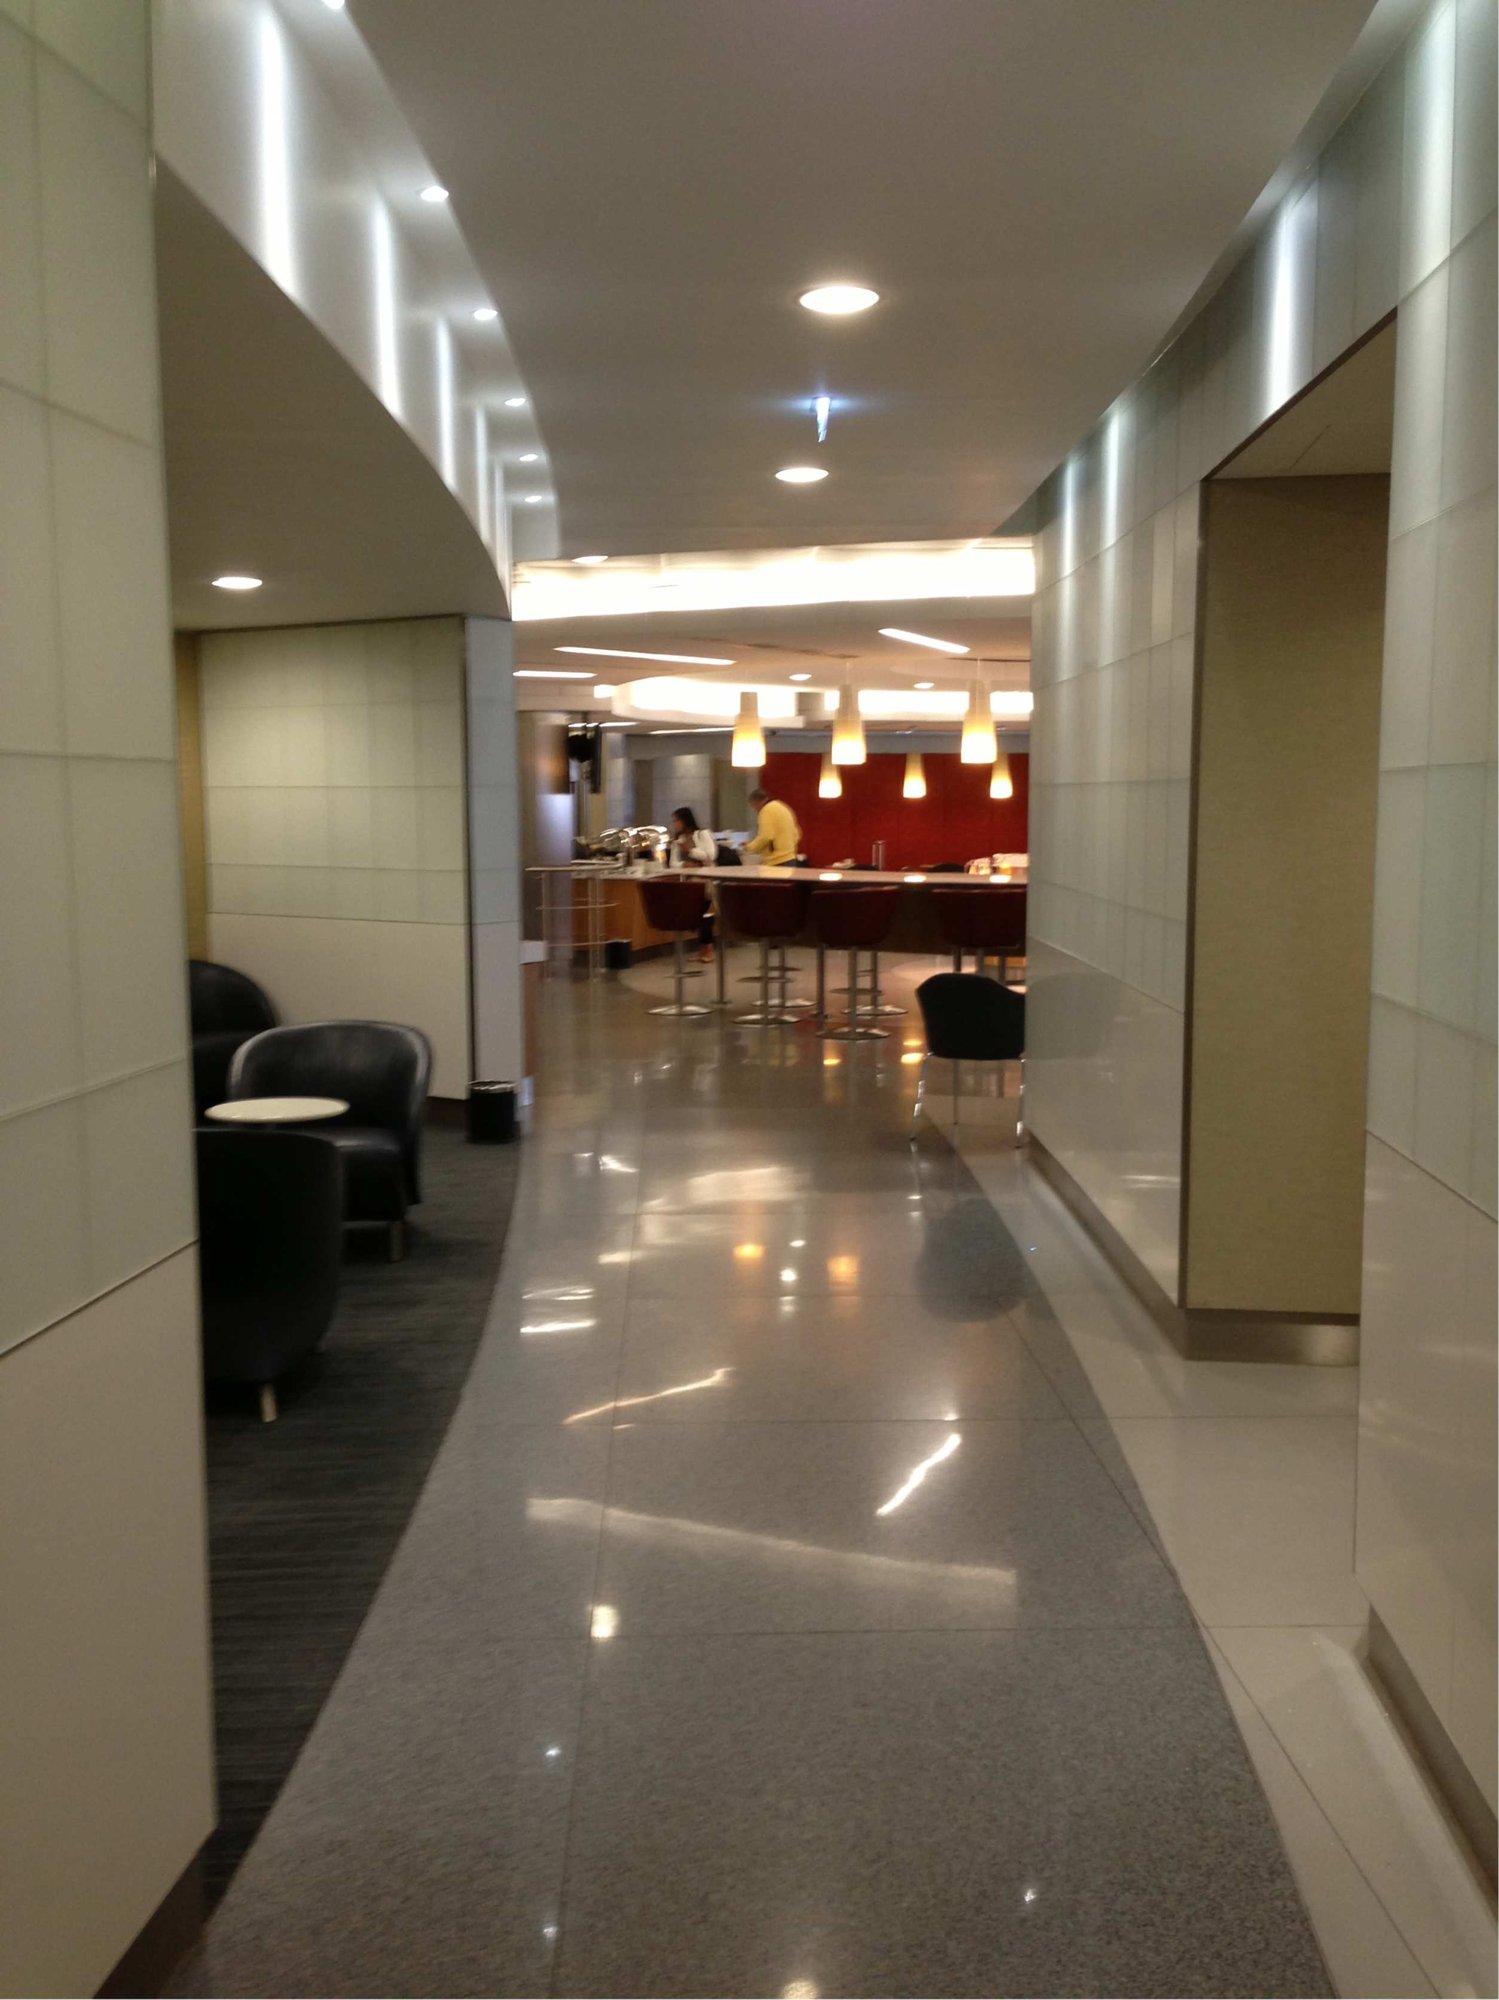 American Airlines Admirals Club image 15 of 38